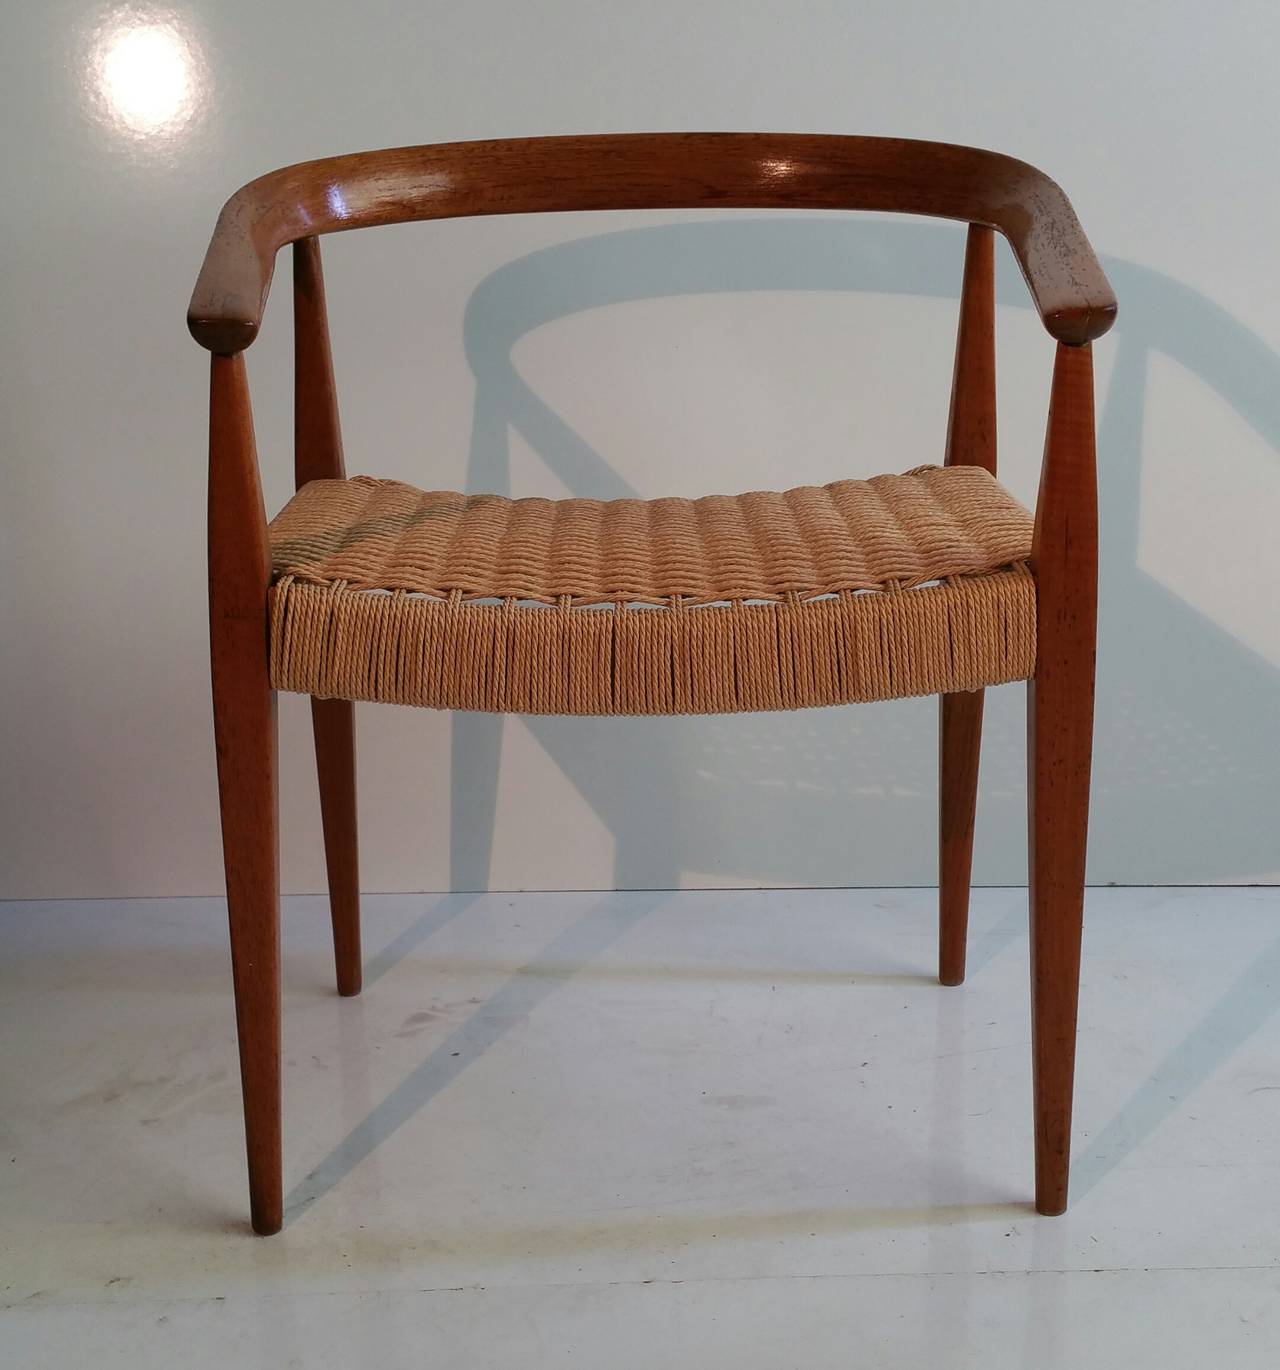 Teak and cane chair by Nanna Ditzel. Made by Kolds Savvaerk, strong design and very early example of her work.